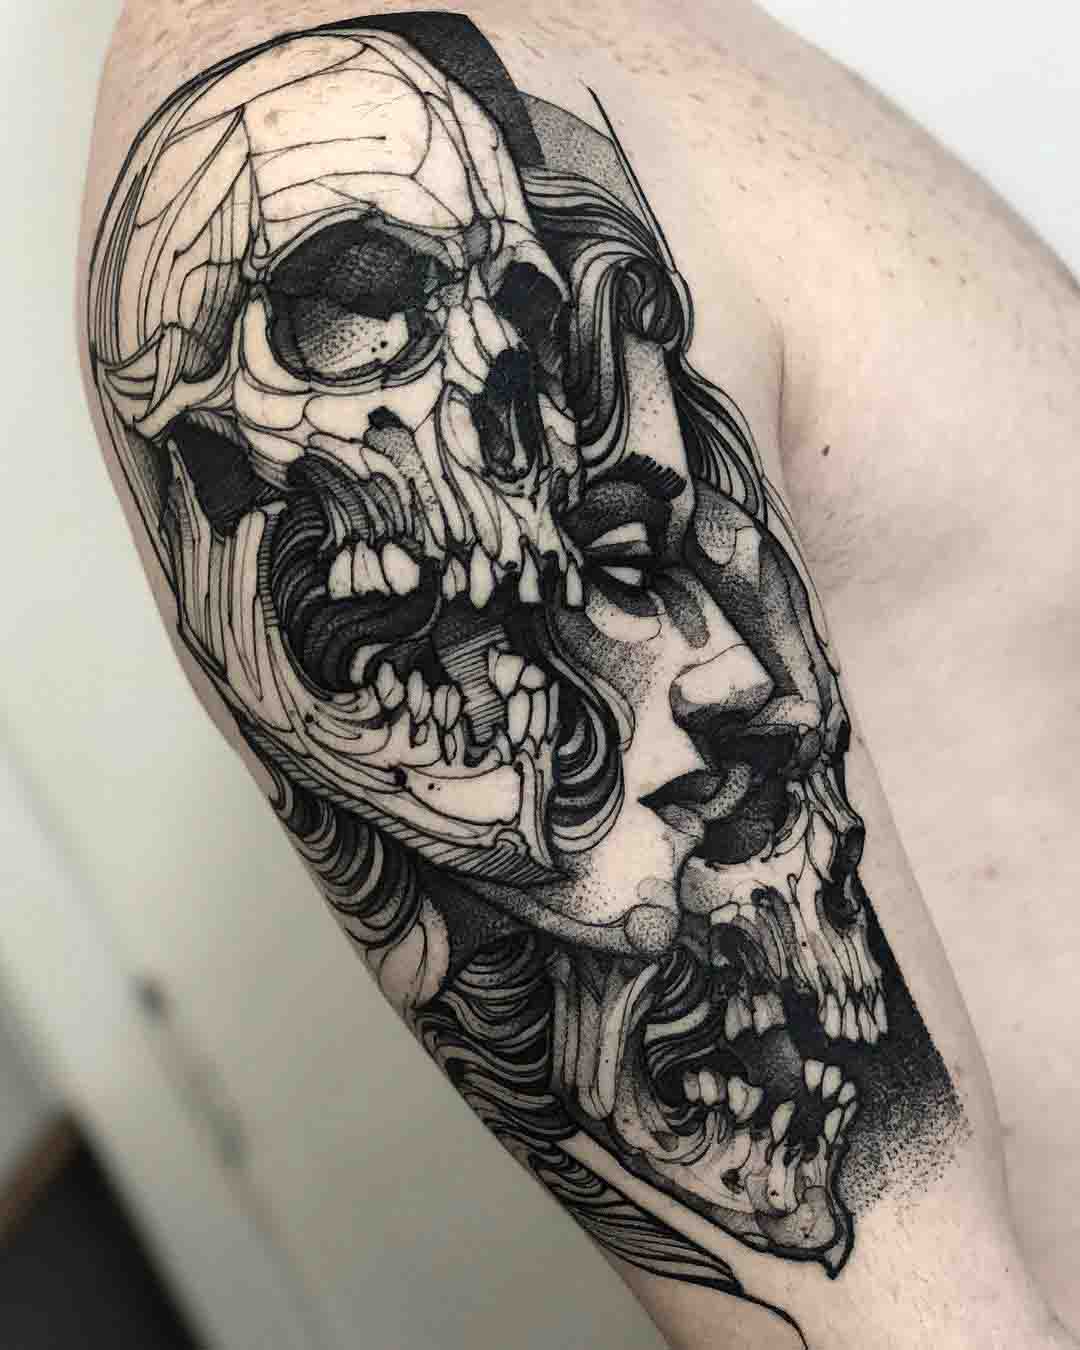 Twos skulls and face tattoo on shoulder